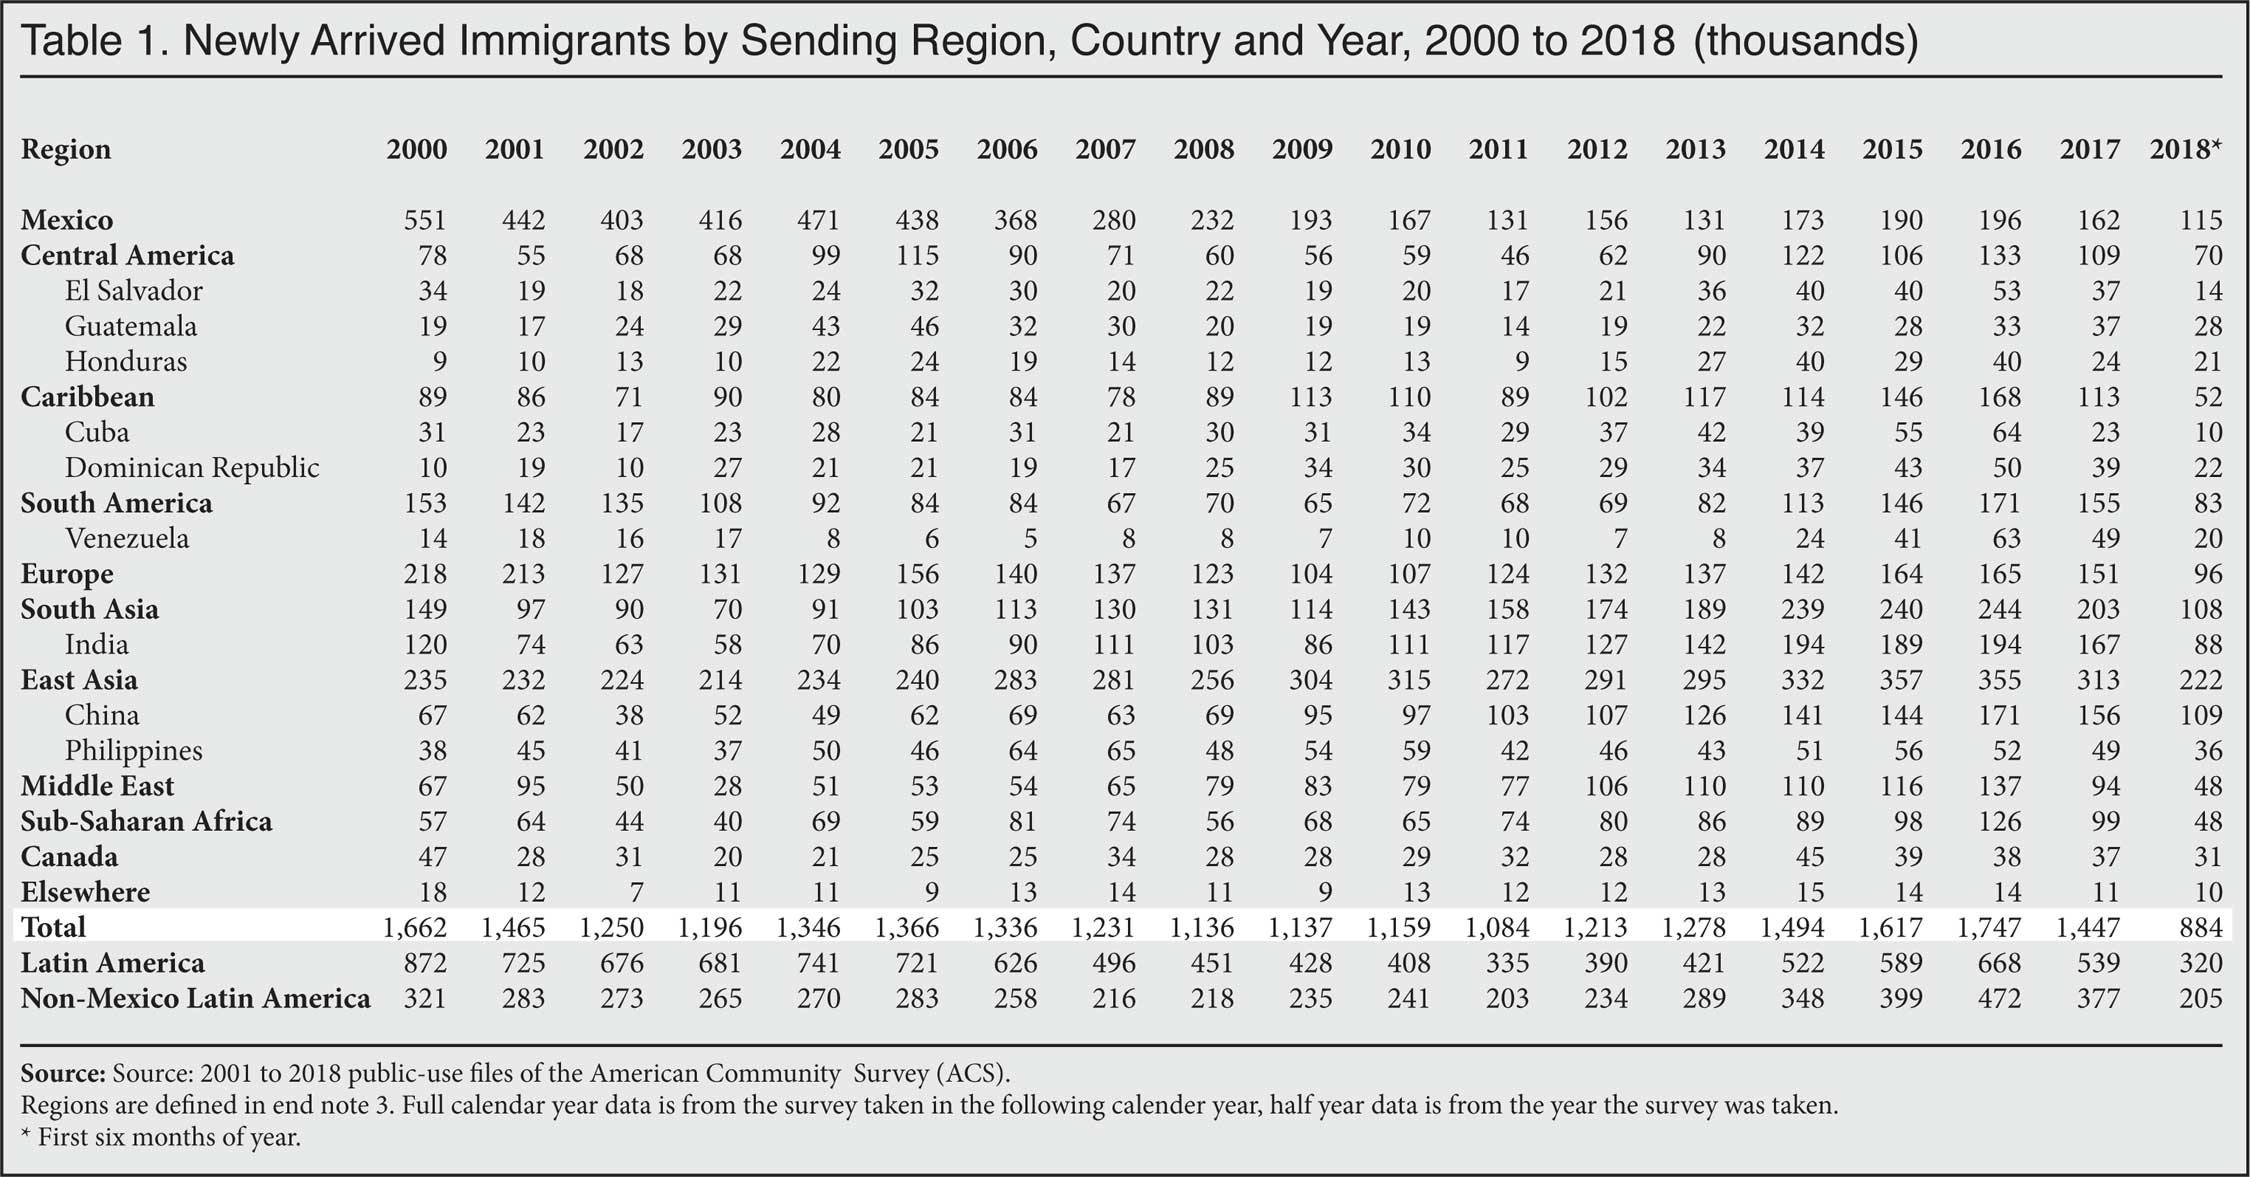 Table: Newly Arrived Immigrants by Sending Region, Country and Year, 2000 to 2018